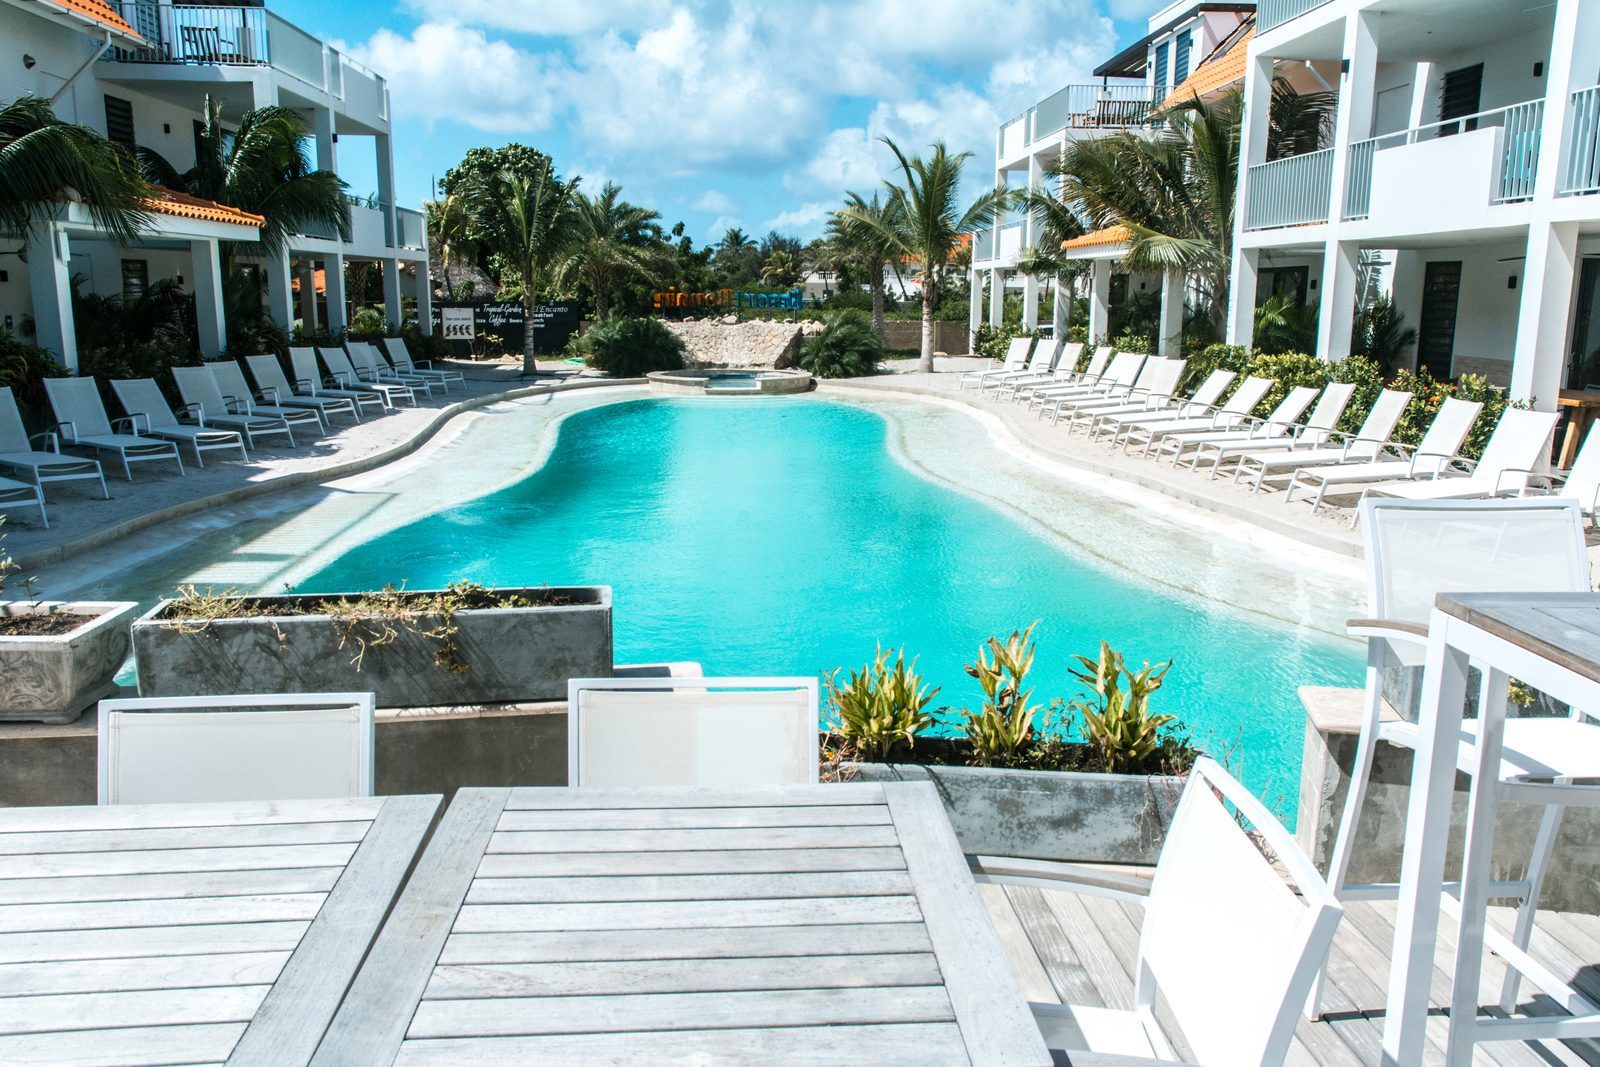 Resort Bonaire offers several terraces from which you have a view of the swimming pool.